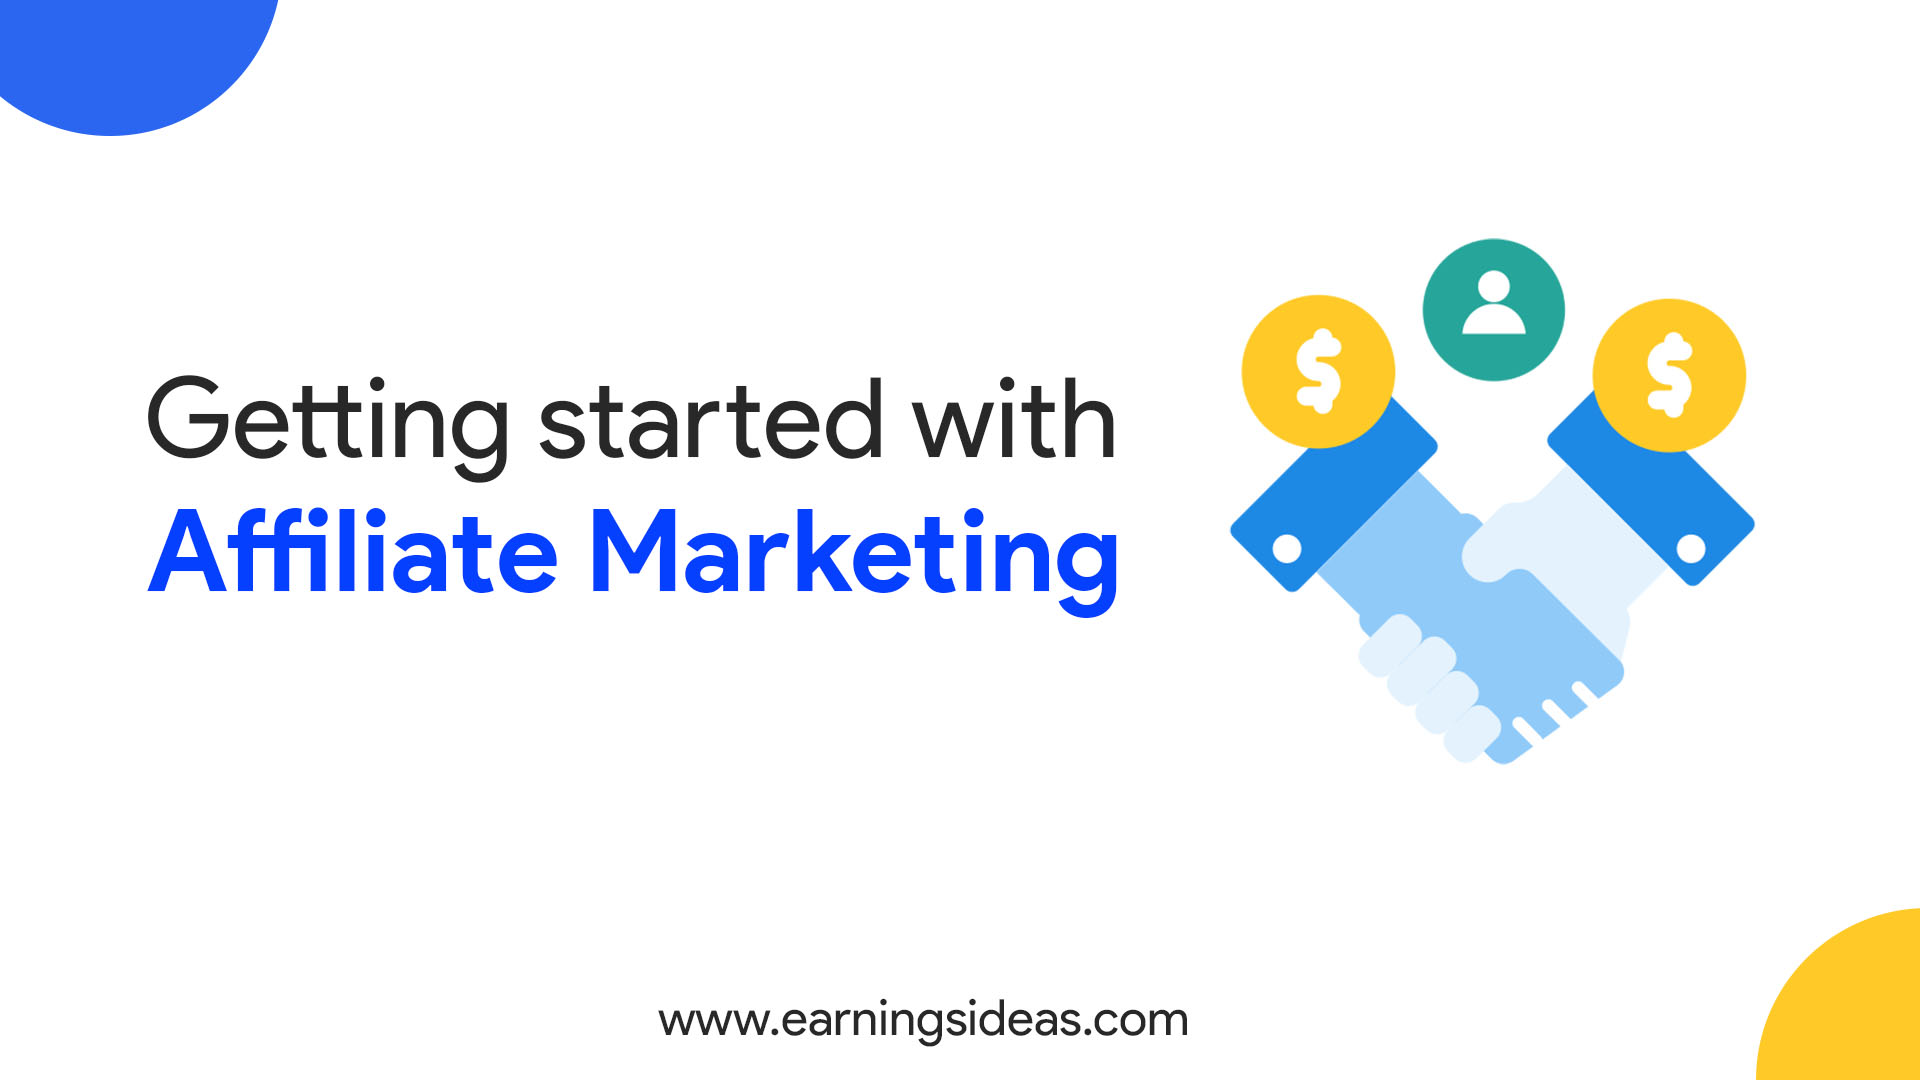 How to get started with affiliate marketing for beginners - A Complete Guide